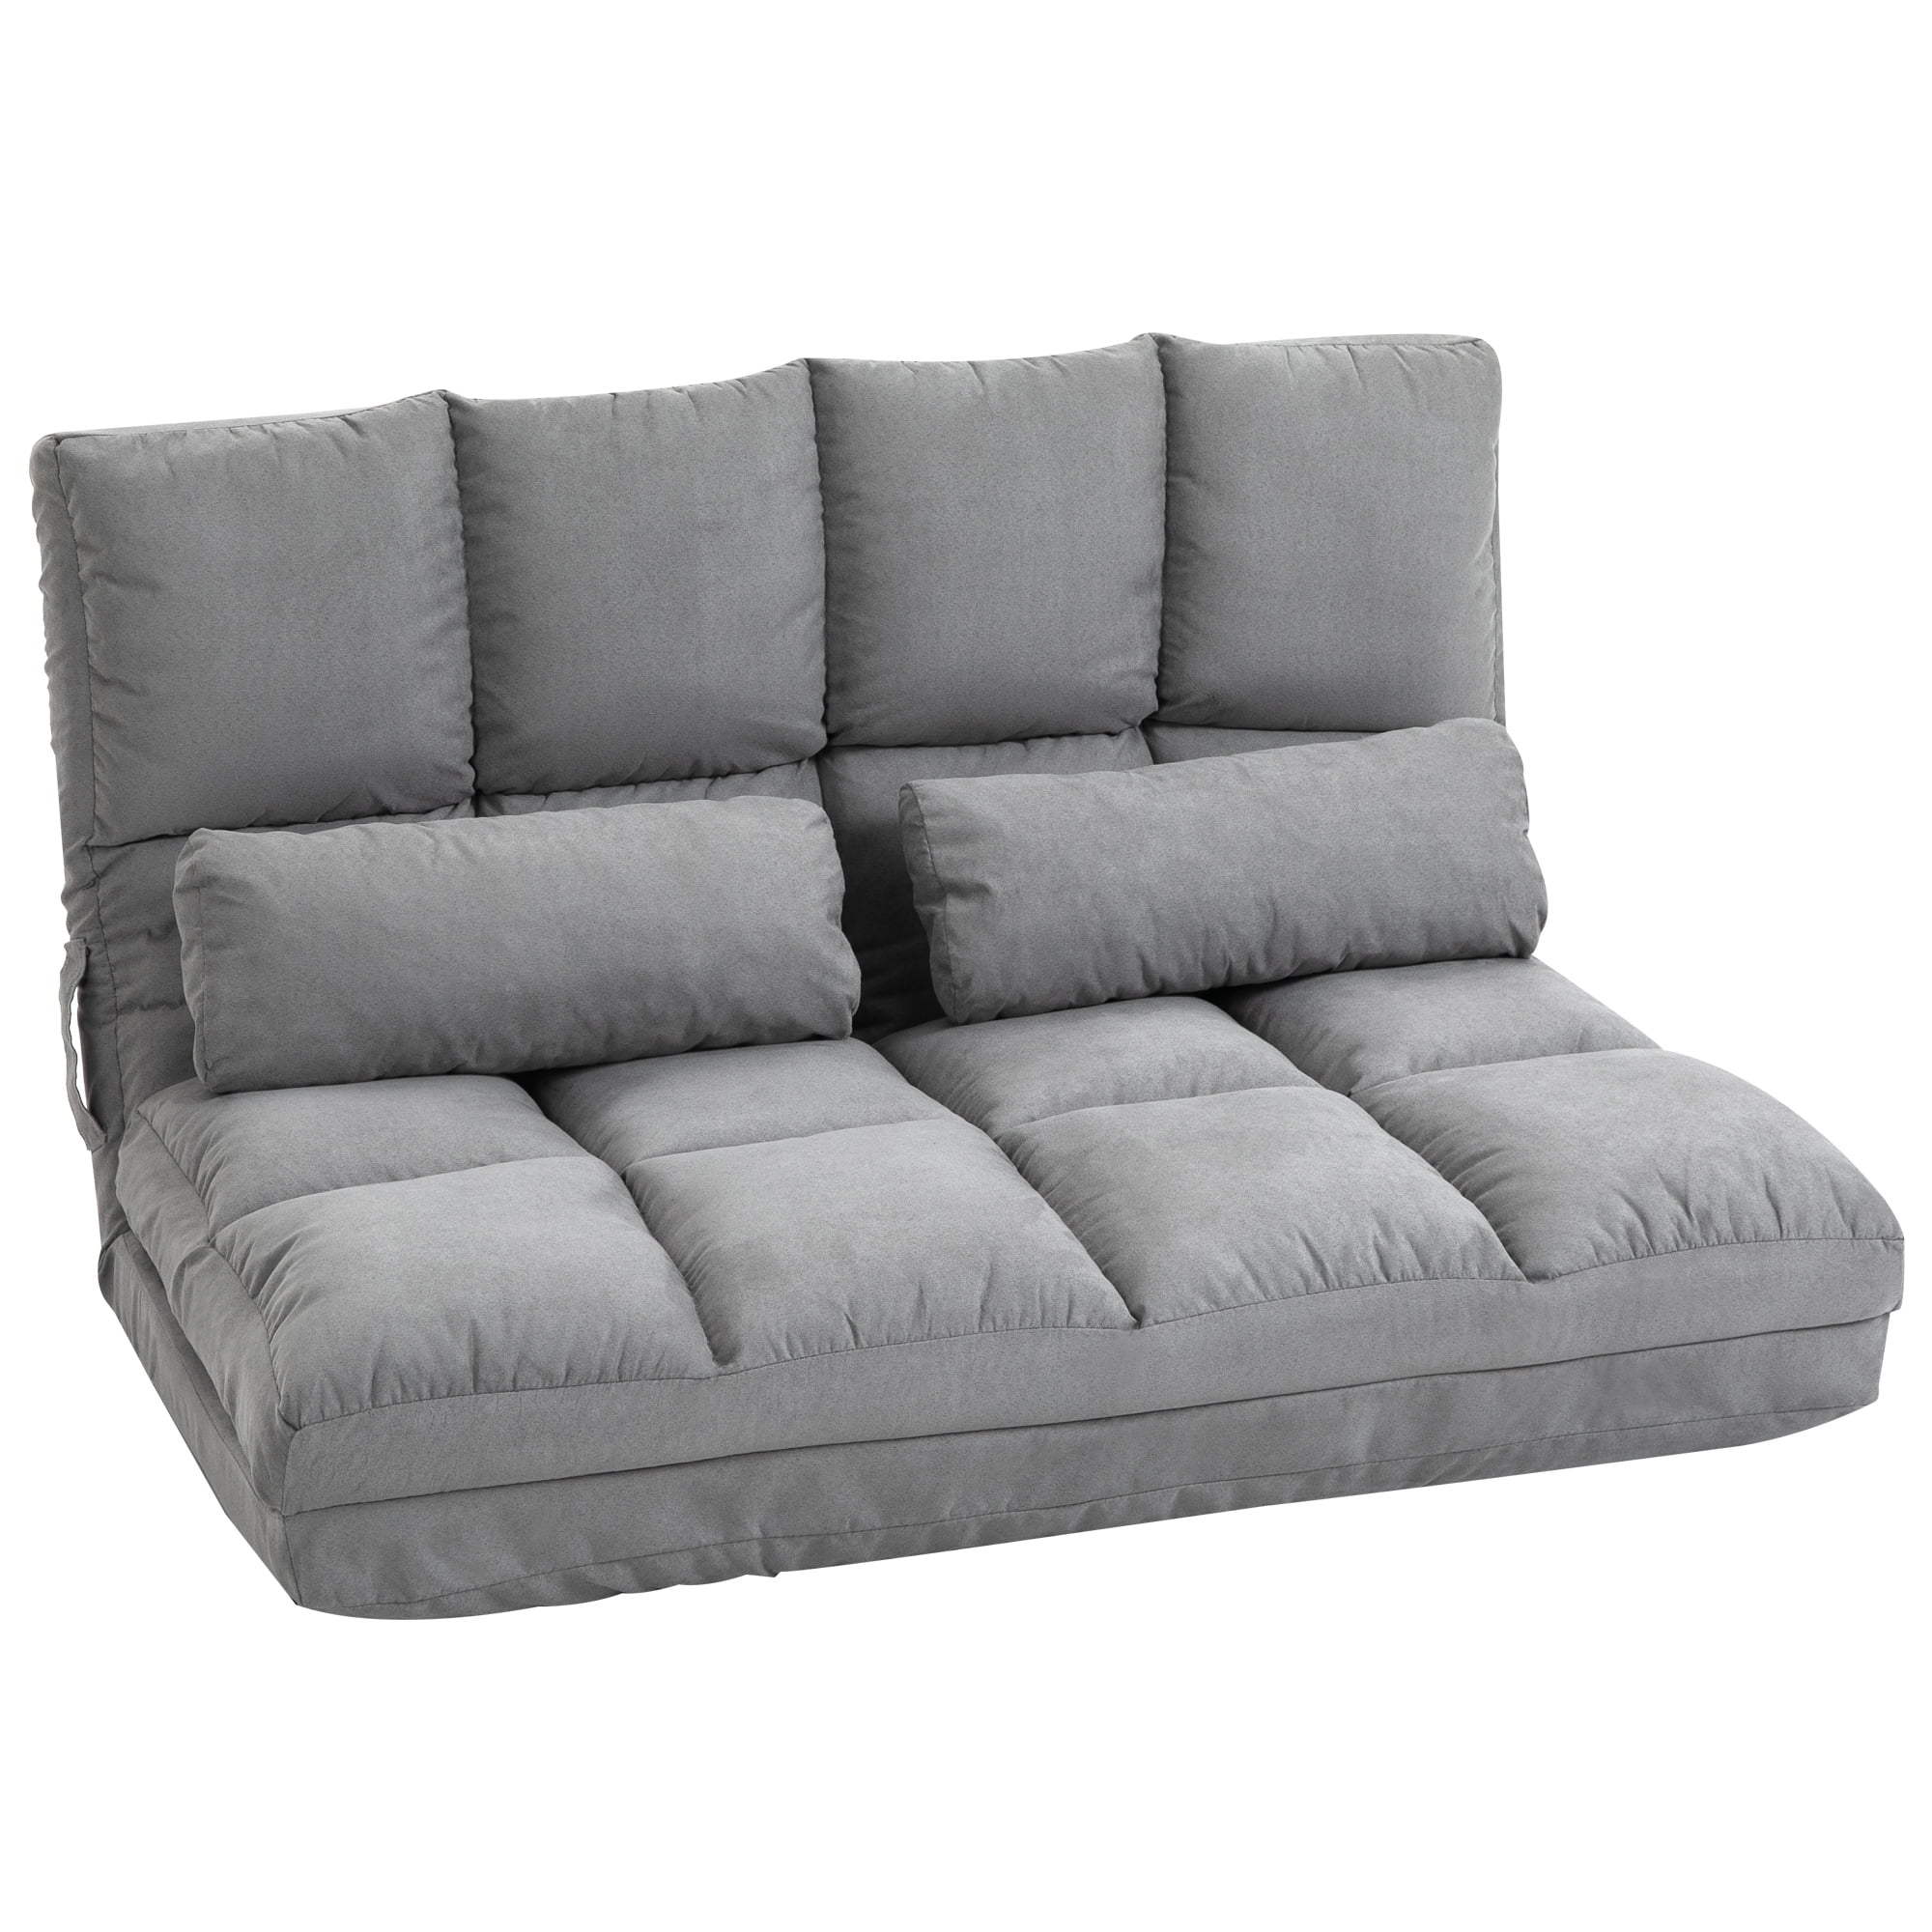 Details about   Memory Foam Futon Sofa Bed Couch Sleeper Convertible Foldable Loveseat FULL Navy 